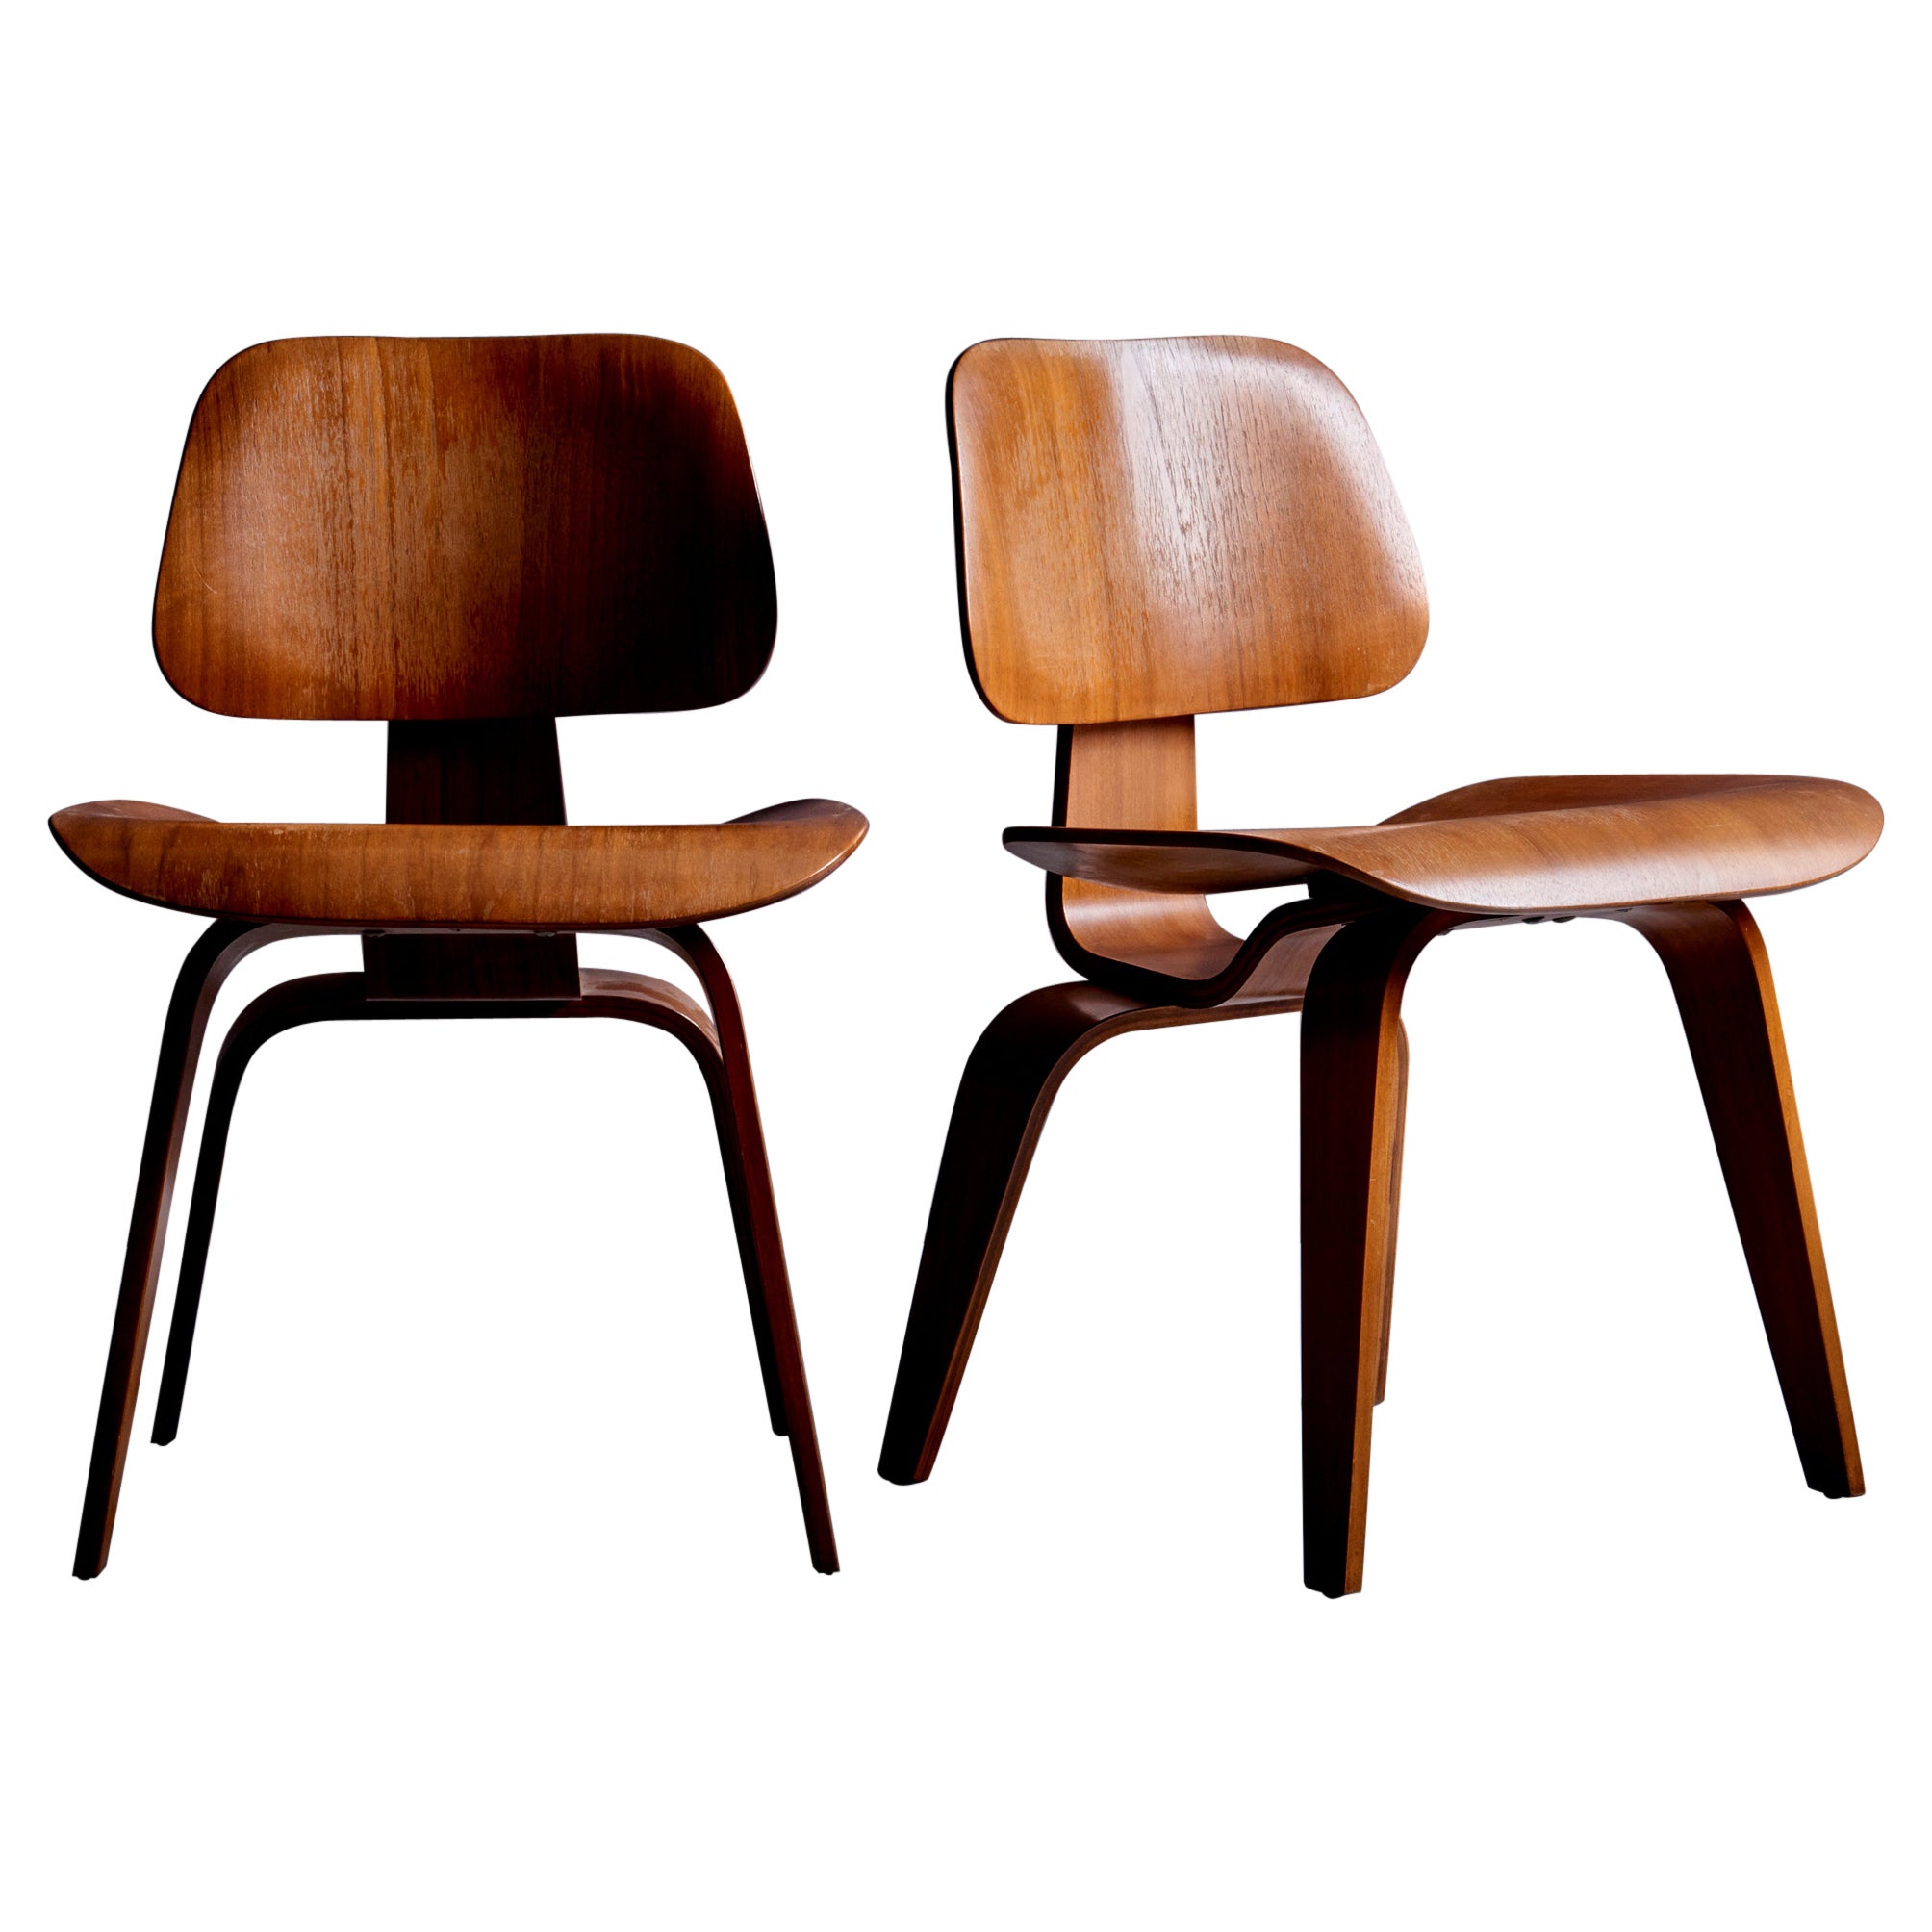 Set of Two Eames DCW Lounge Chairs in Walnut for Herman Miller, USA, 1950s